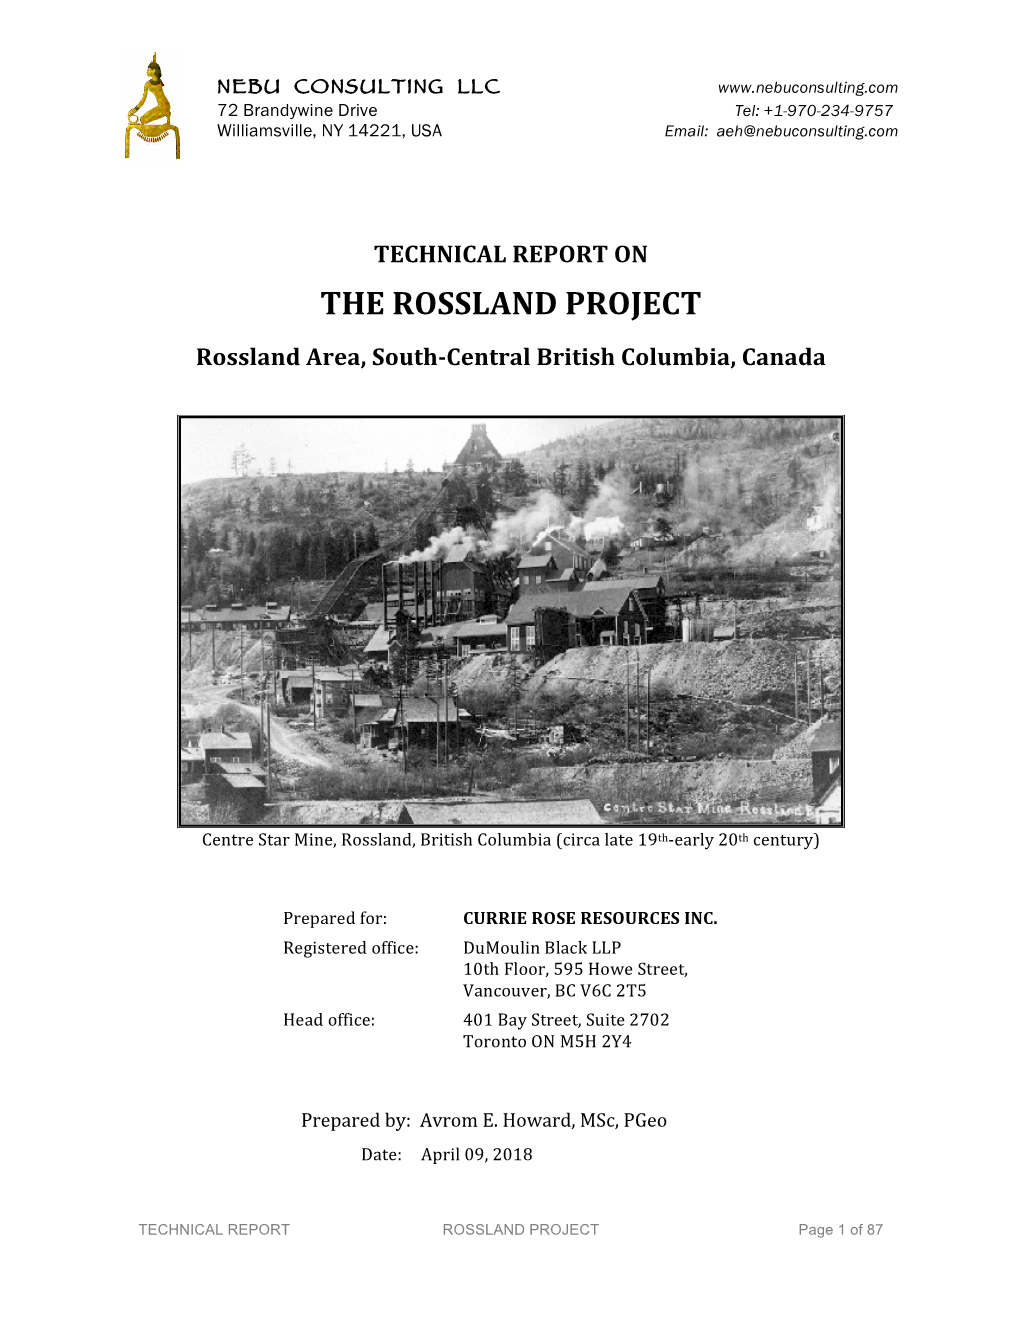 THE ROSSLAND PROJECT Rossland Area, South-Central British Columbia, Canada